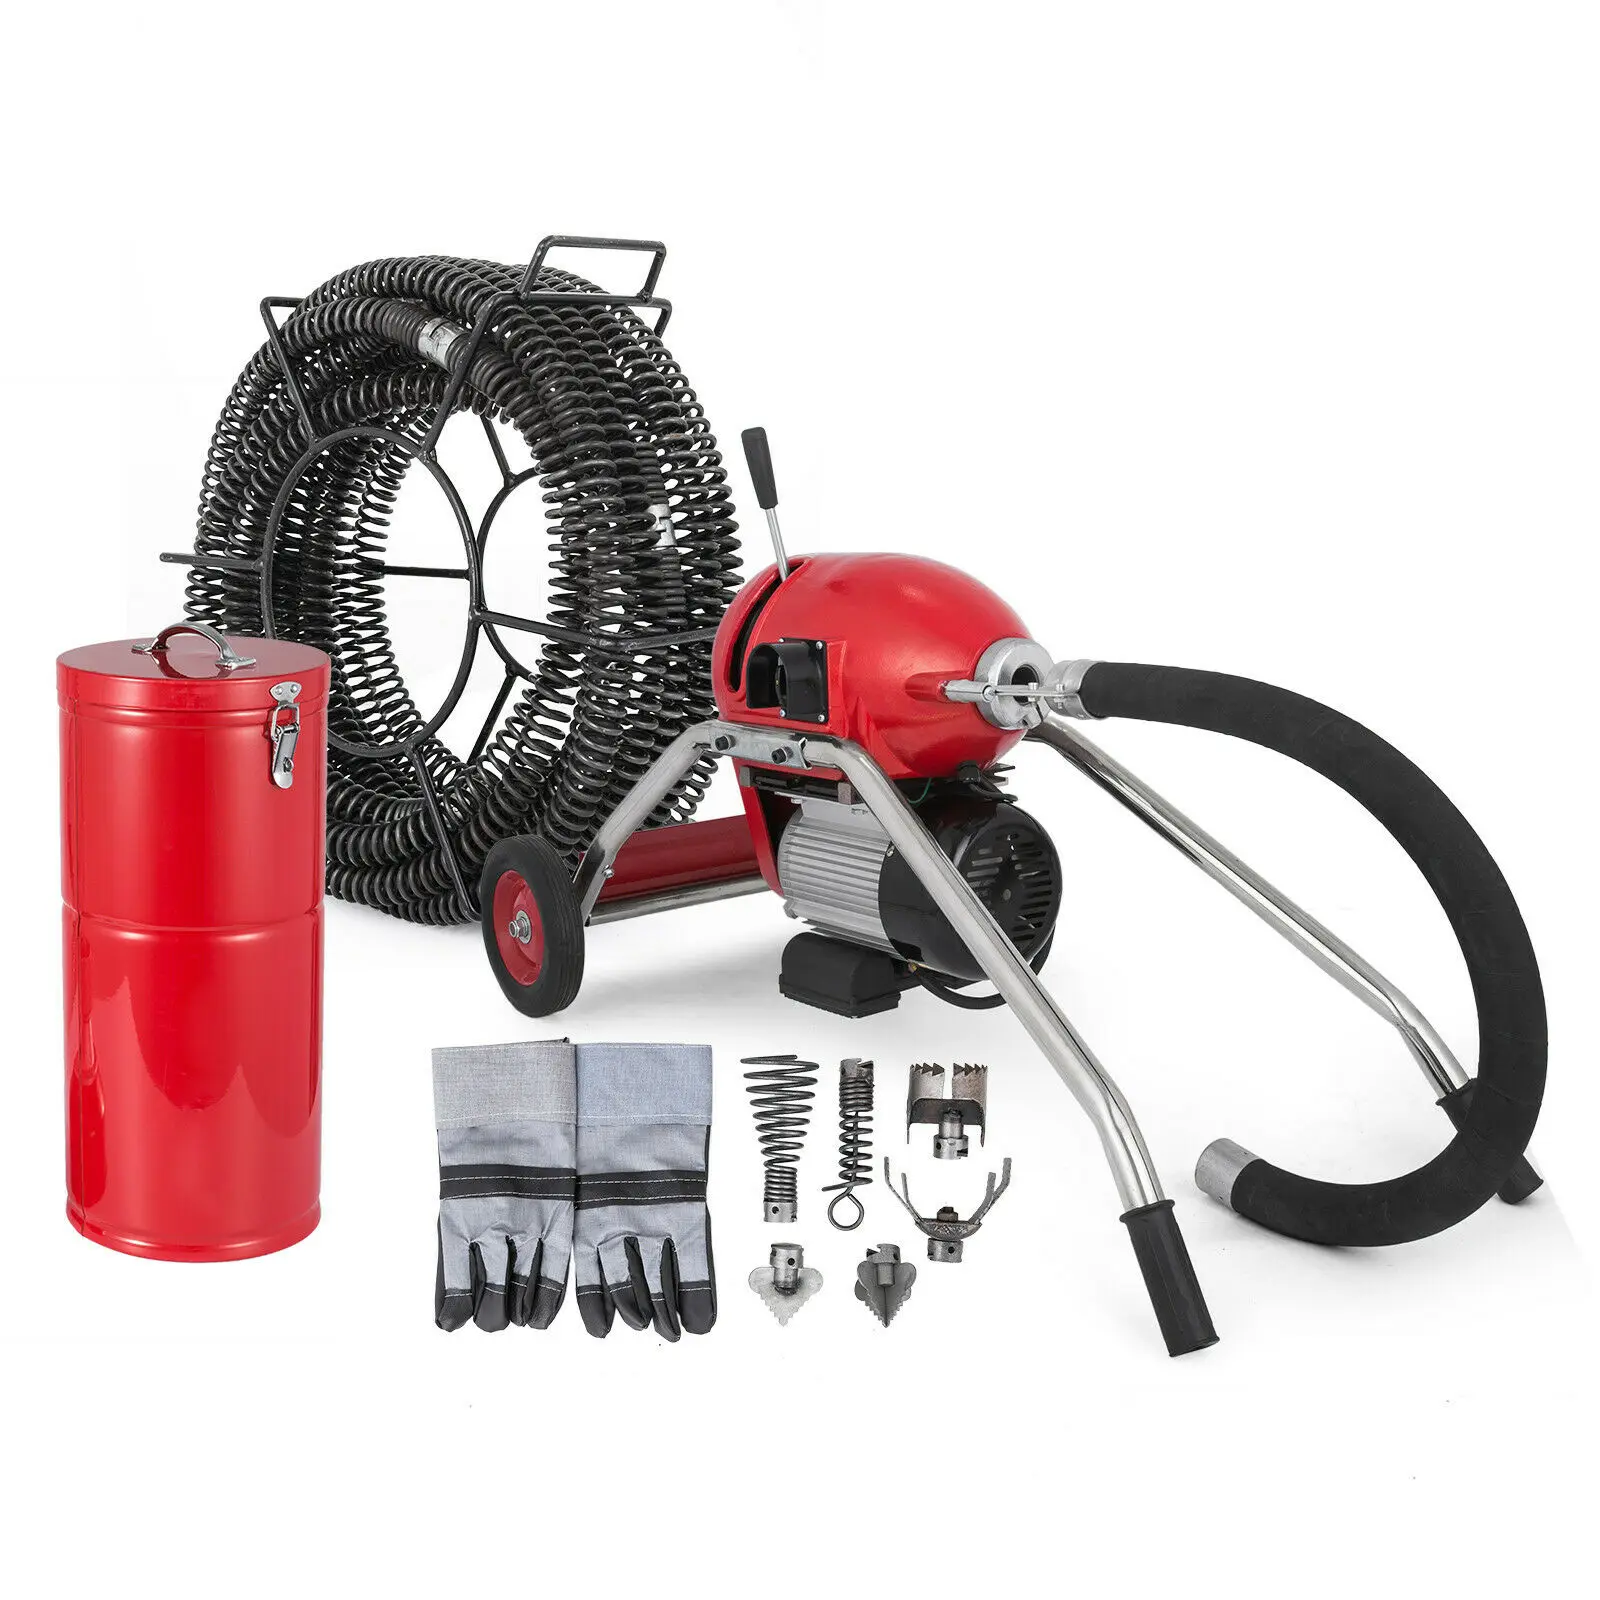 20-200mm Pipe Drain Cleaner 1100W Pipe Drain Cleaning Machine 16mx30mm Spiral Set with 6 cutters enlarge